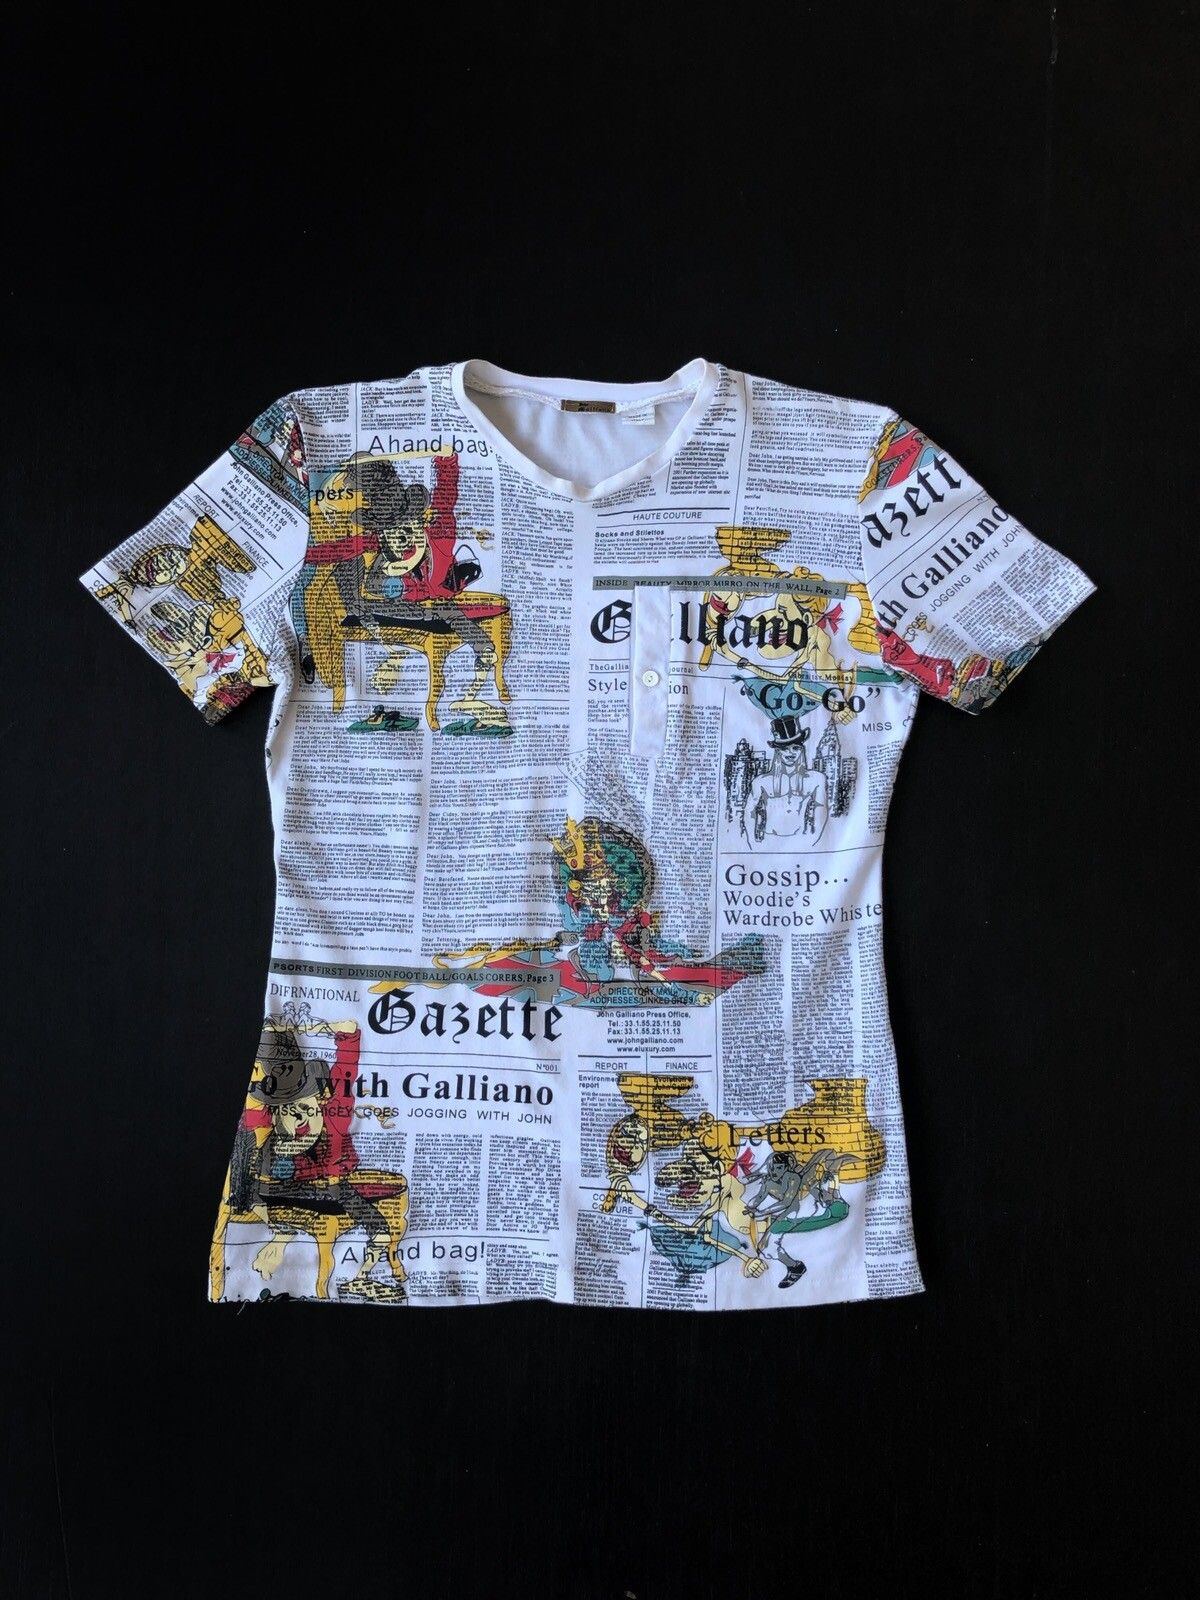 Archival Clothing DOPE🔥John Galliano Beauty Tabloid Newspaper Shirt Size US S / EU 44-46 / 1 - 2 Preview